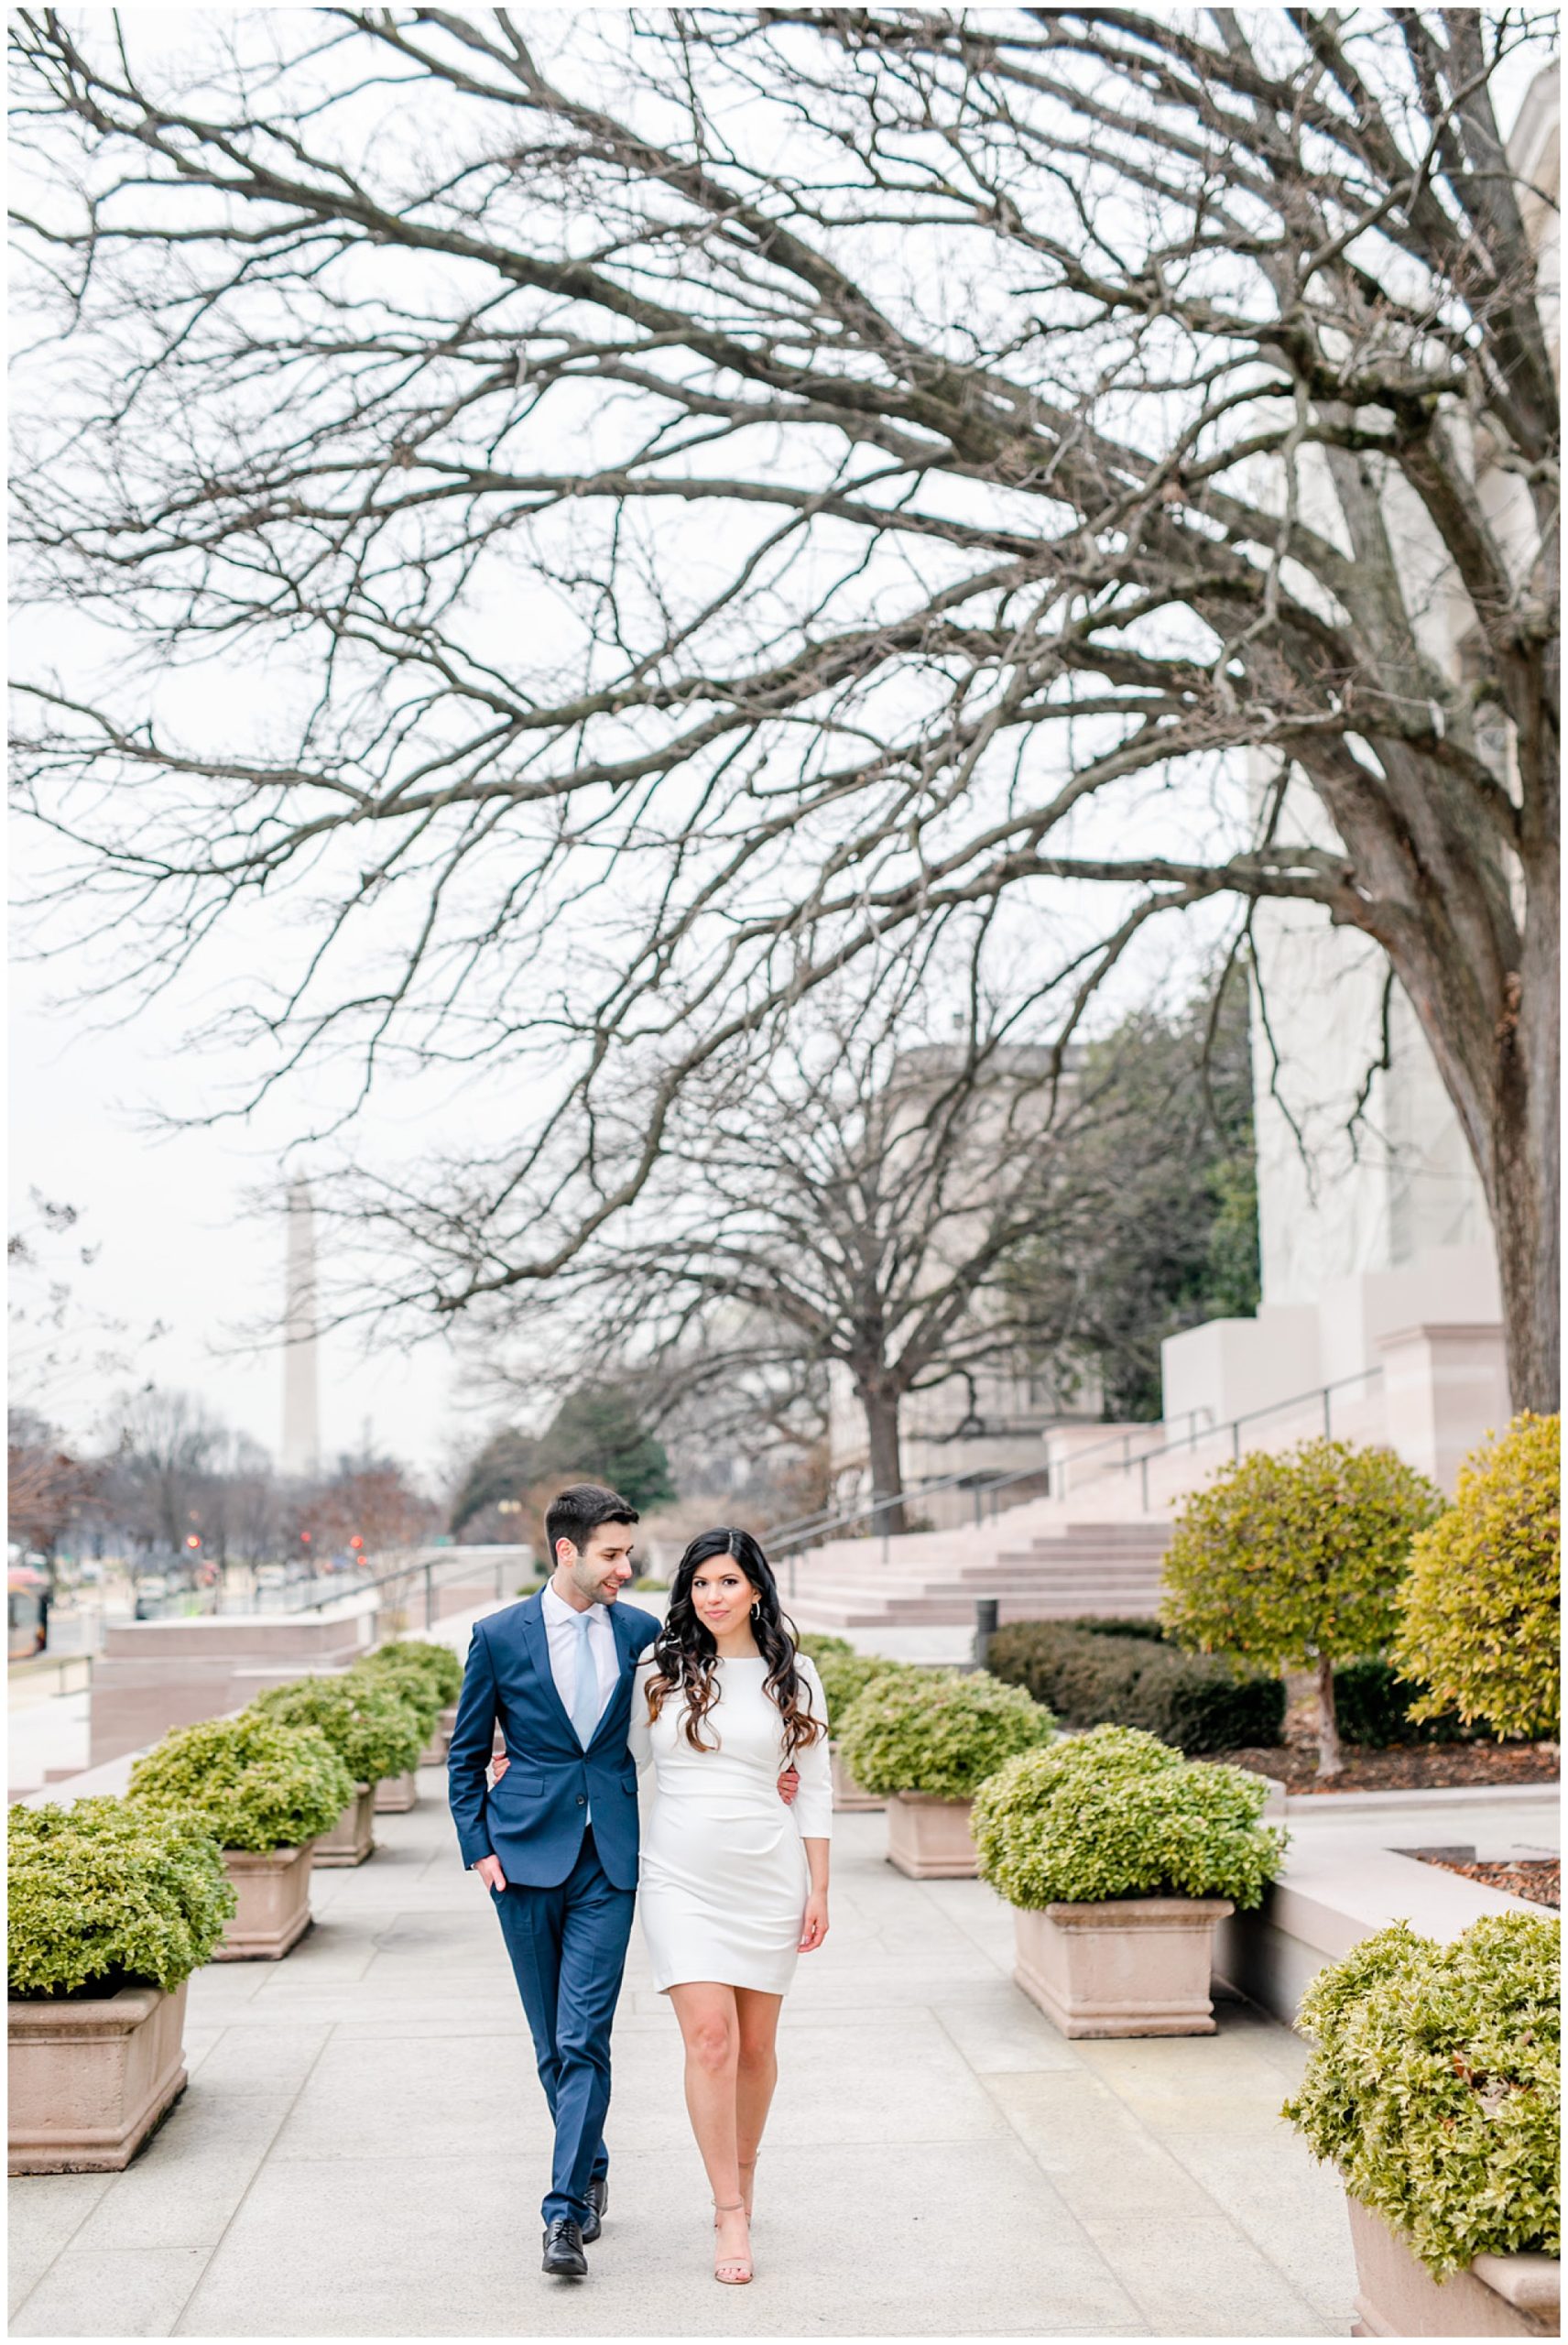 winter National Mall elopement, DC elopement, DC elopement photographer, DC wedding photographer, DC wedding portraits, National mall portraits, National Mall elopement, Rachel E.H. Photography, Capitol Hill, newlywed portraits, Washington Monument, National Gallery of Art